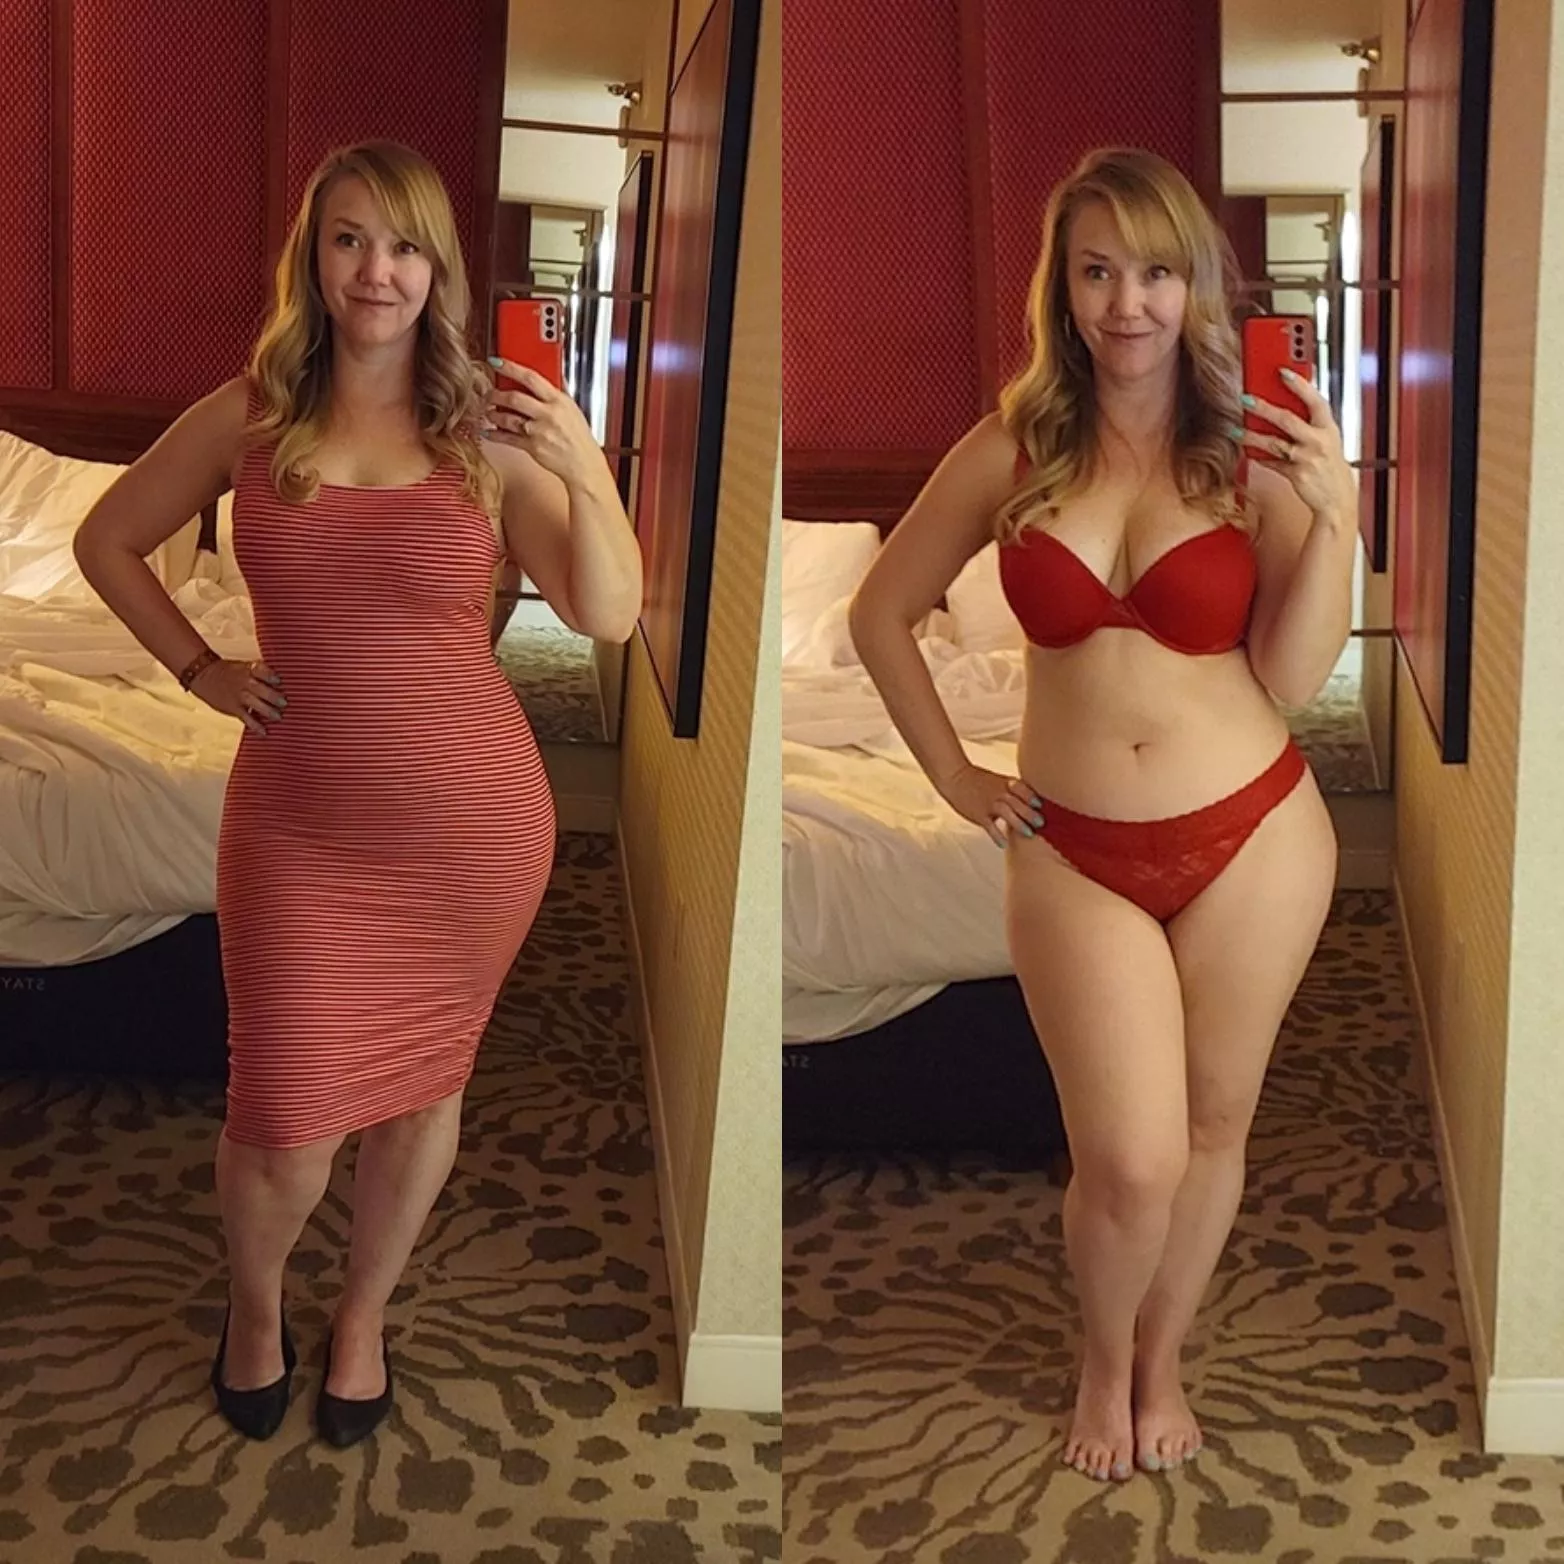 Turned 48 today! How are my curves looking? [F48]